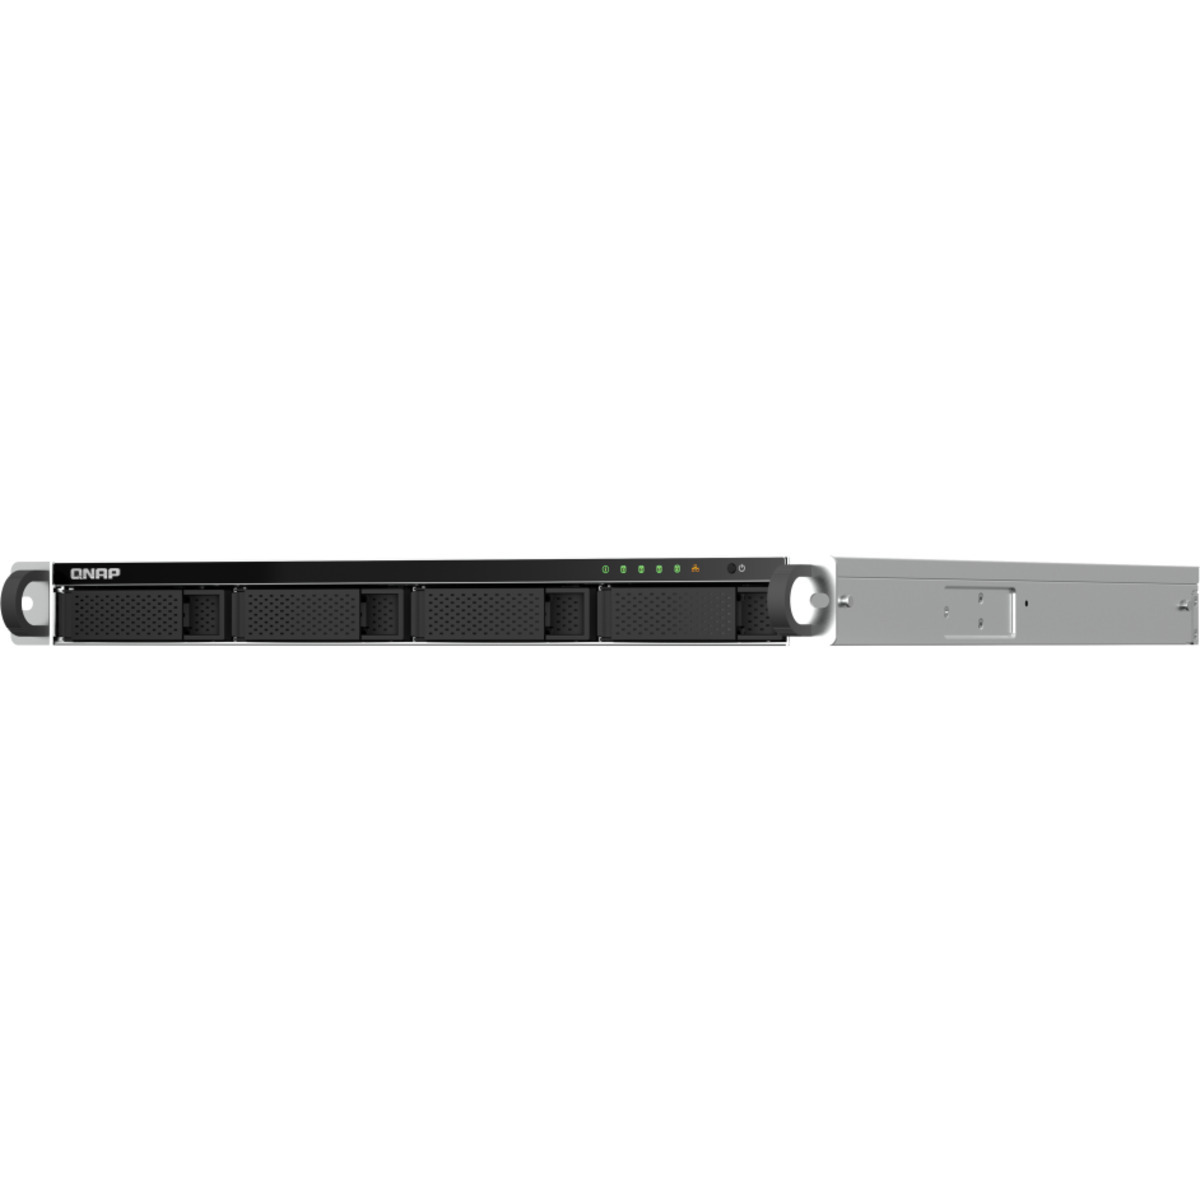 buy QNAP TS-464U 16tb RackMount NAS - Network Attached Storage Device 4x4000gb Toshiba MN Series MN08ADA400E 3.5 7200rpm SATA 6Gb/s HDD NAS Class Drives Installed - Burn-In Tested - ON SALE - FREE RAM UPGRADE - nas headquarters buy network attached storage server device das new raid-5 free shipping simply usa christmas holiday black friday cyber monday week sale happening now! TS-464U